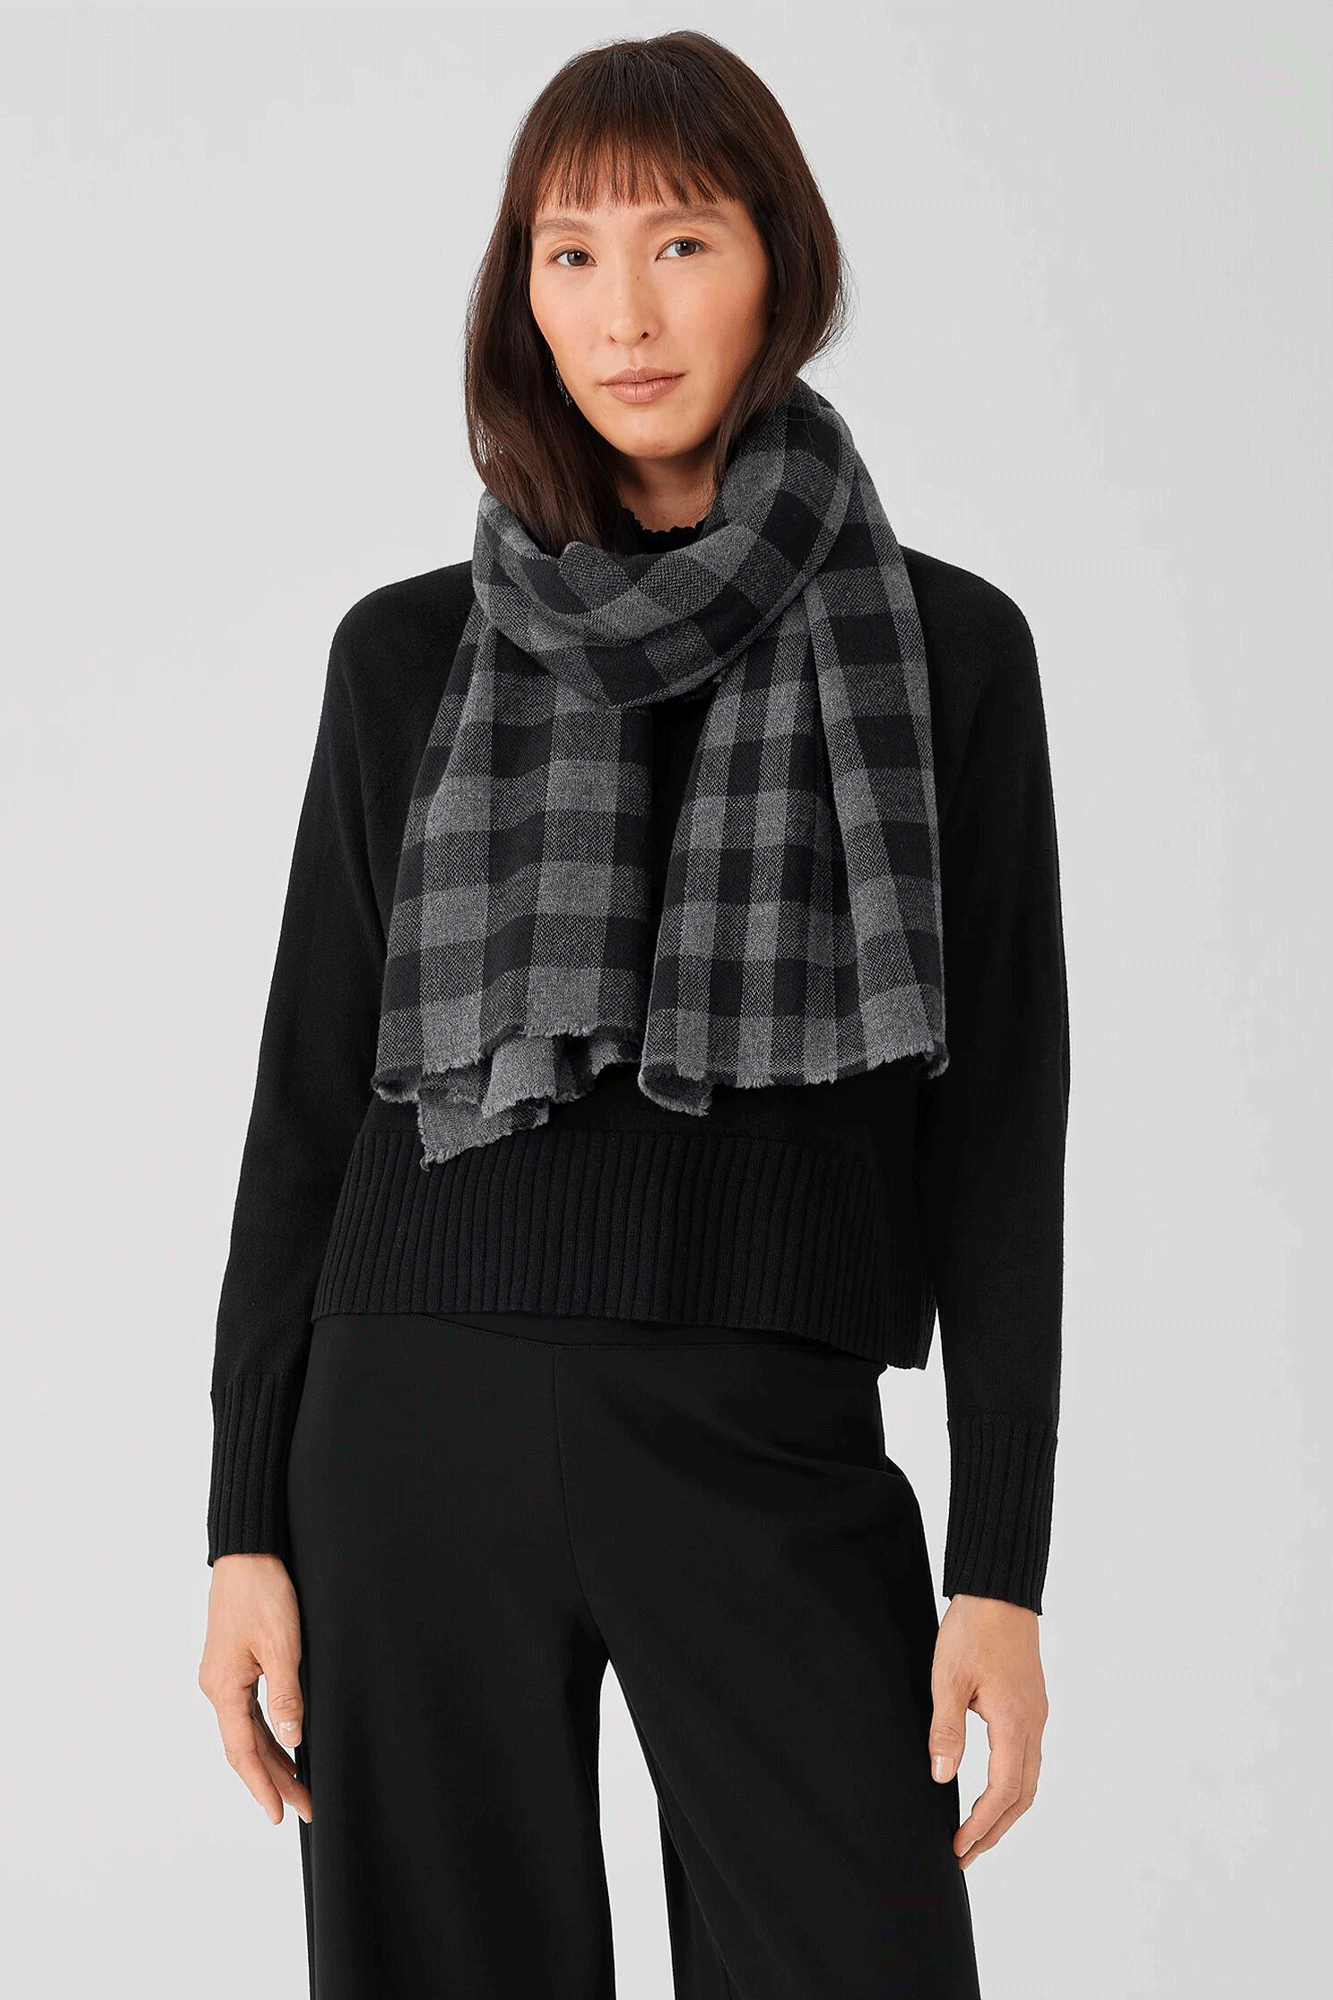 This remarkable Wash Wool Check Scarf from Eileen Fisher is yarn-dyed to create a unique check pattern, and washed for a soft touch. Its light wool fabric provides effortless wear that you can enjoy all year round.